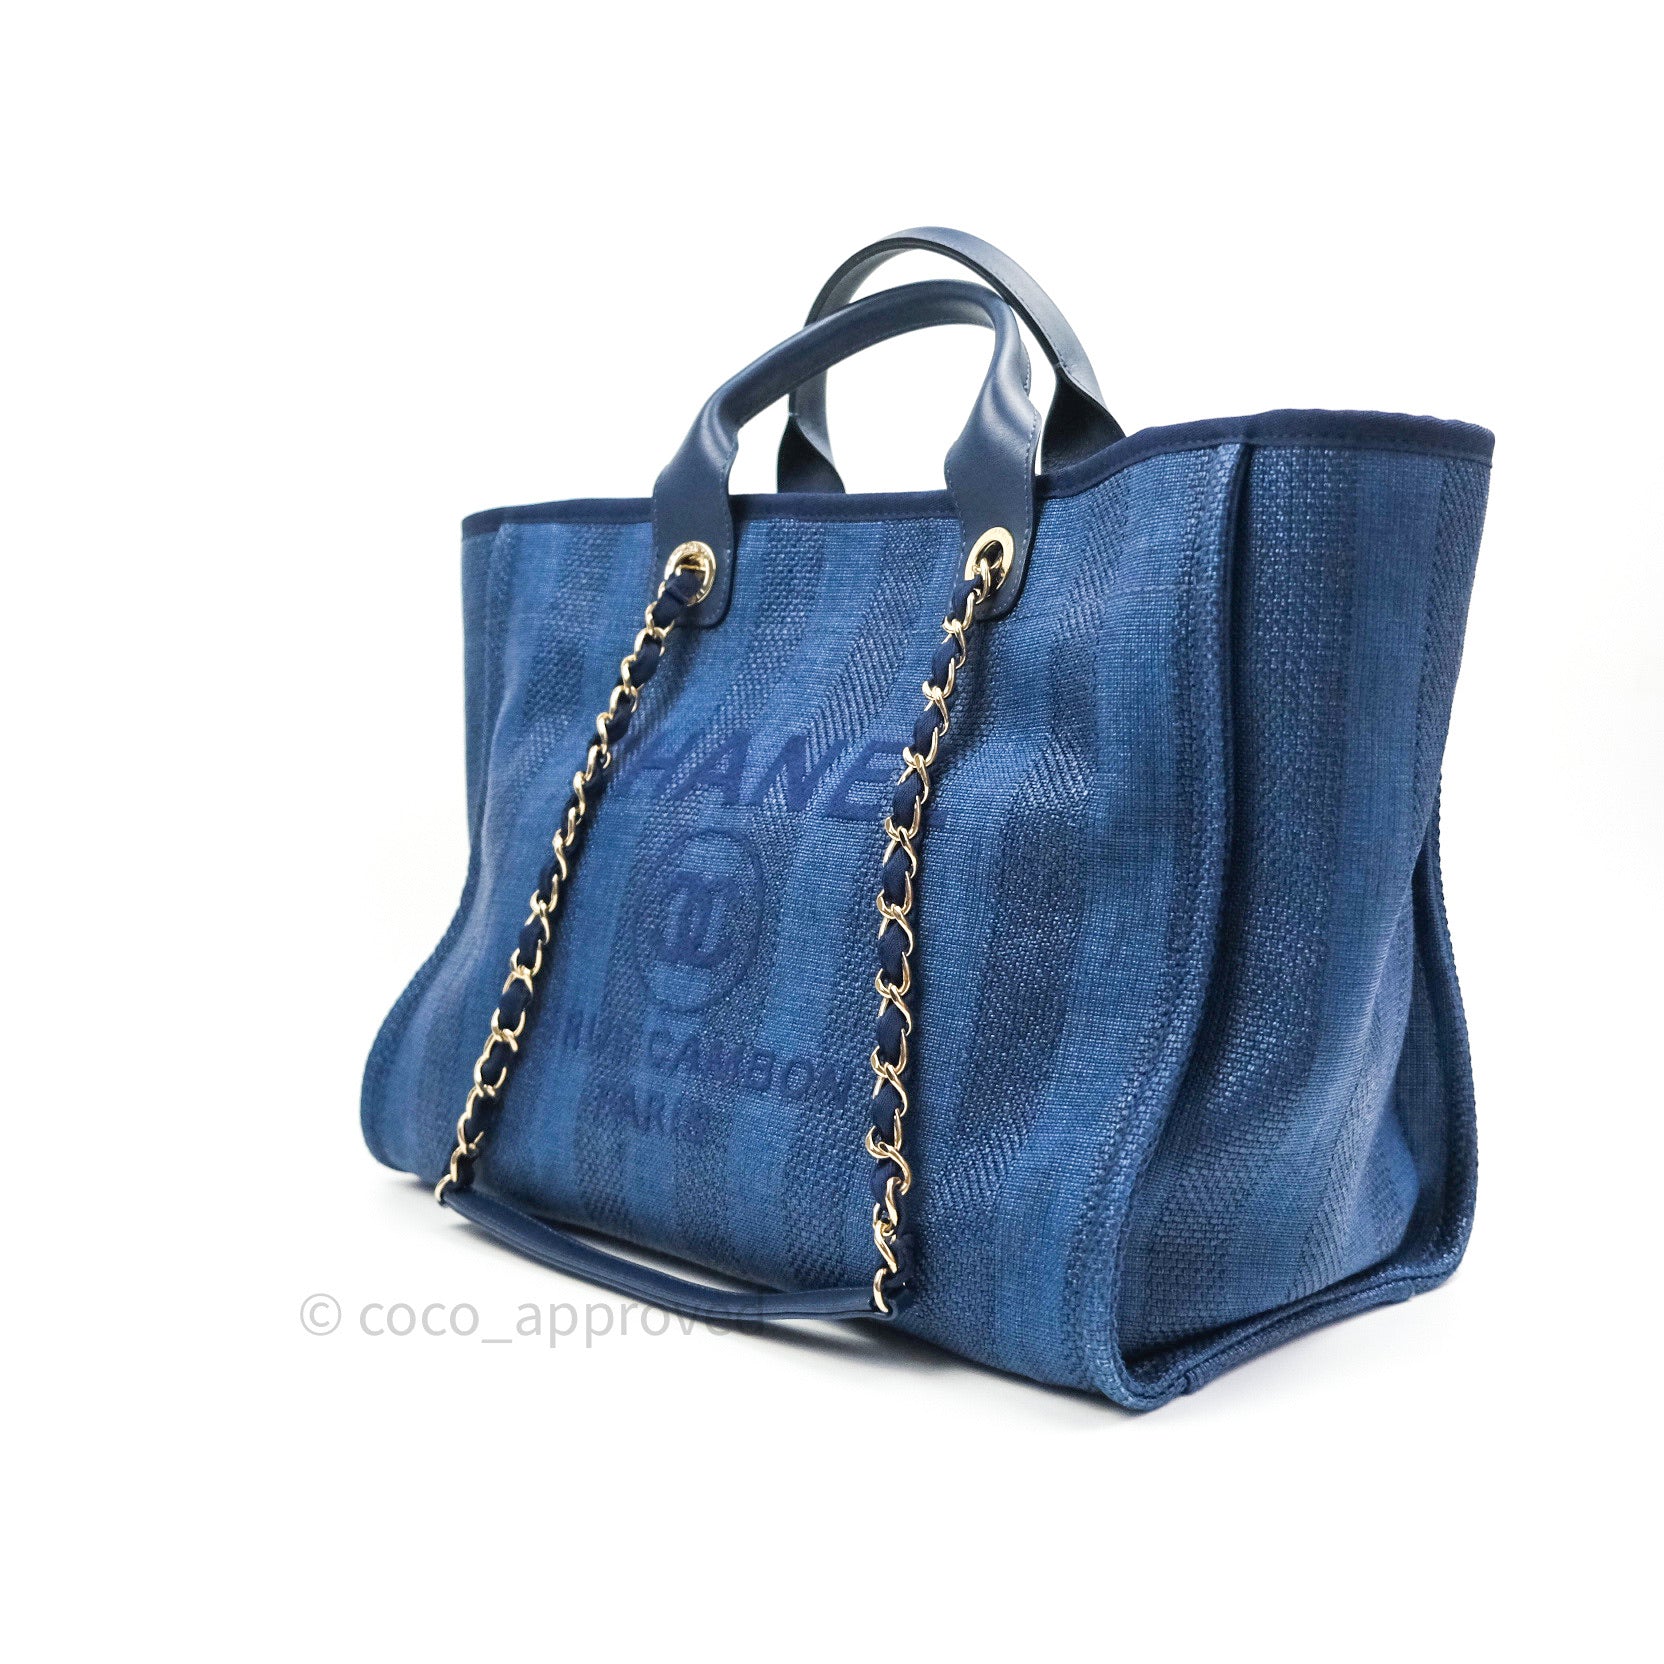 Chanel Large Deauville Shopping Tote - Blue Totes, Handbags